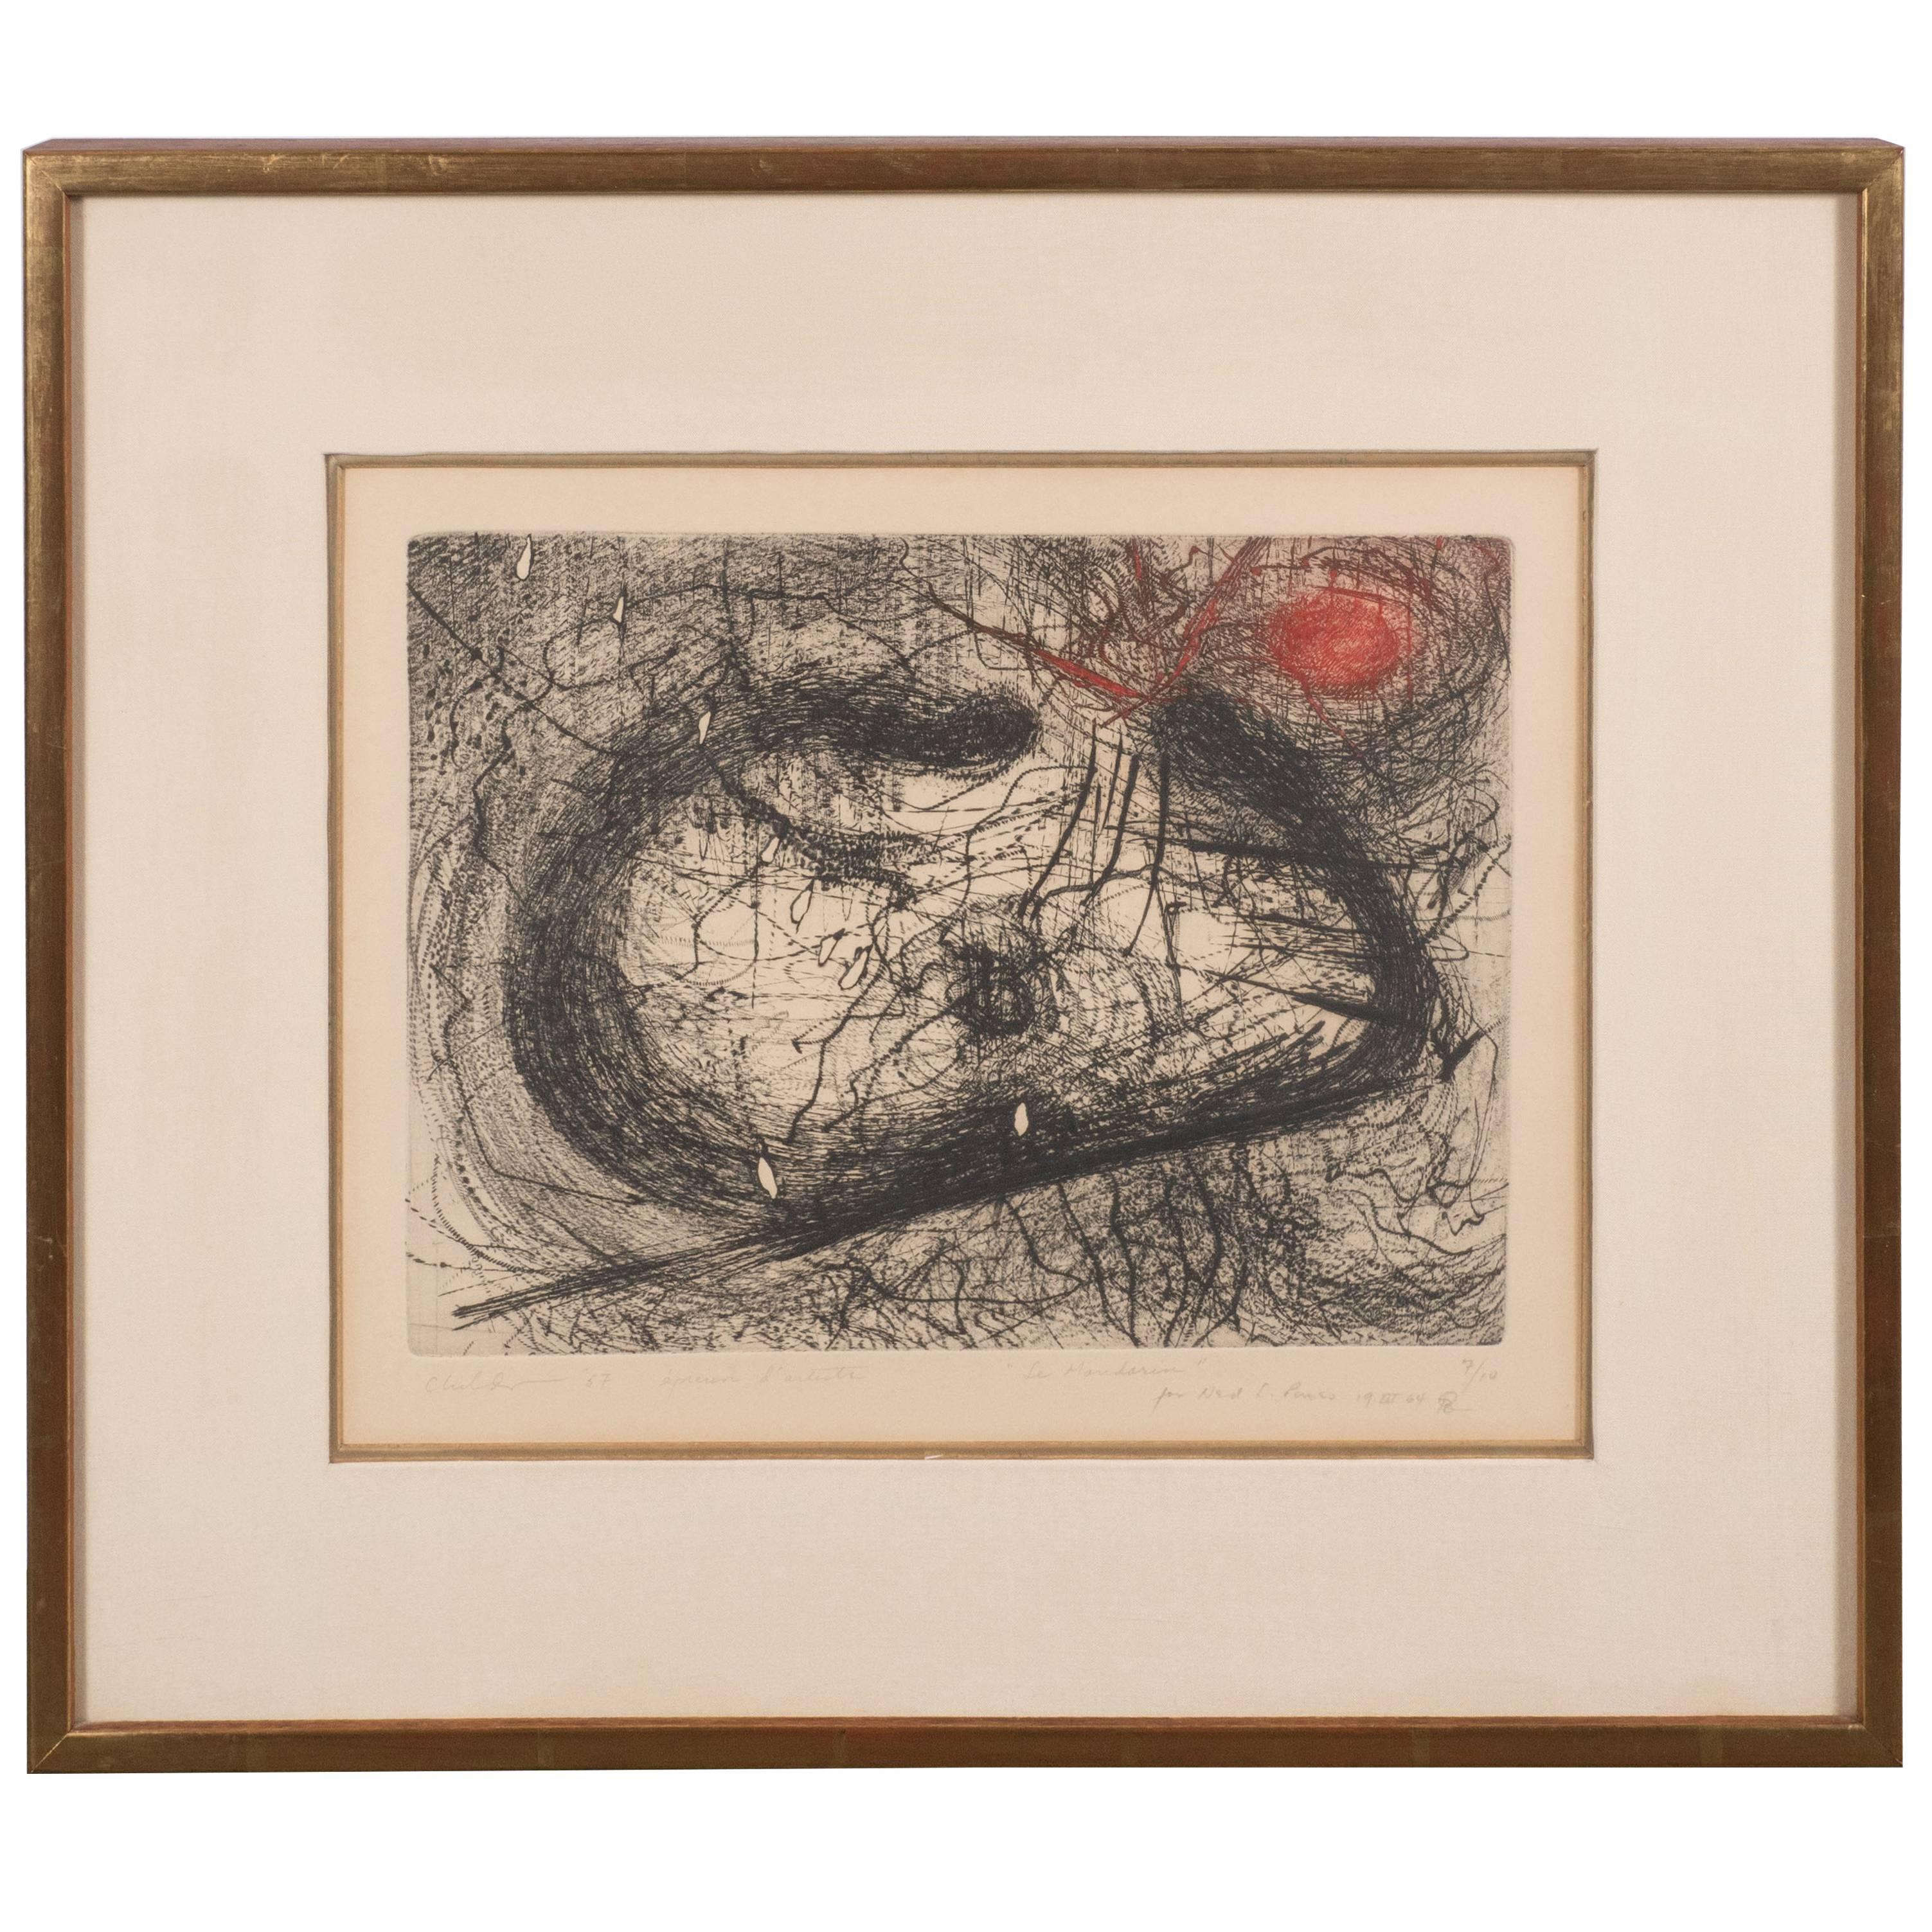 Modern Abstract Expressionist Print, "Le Mandarin" Scribbles in Black and Red